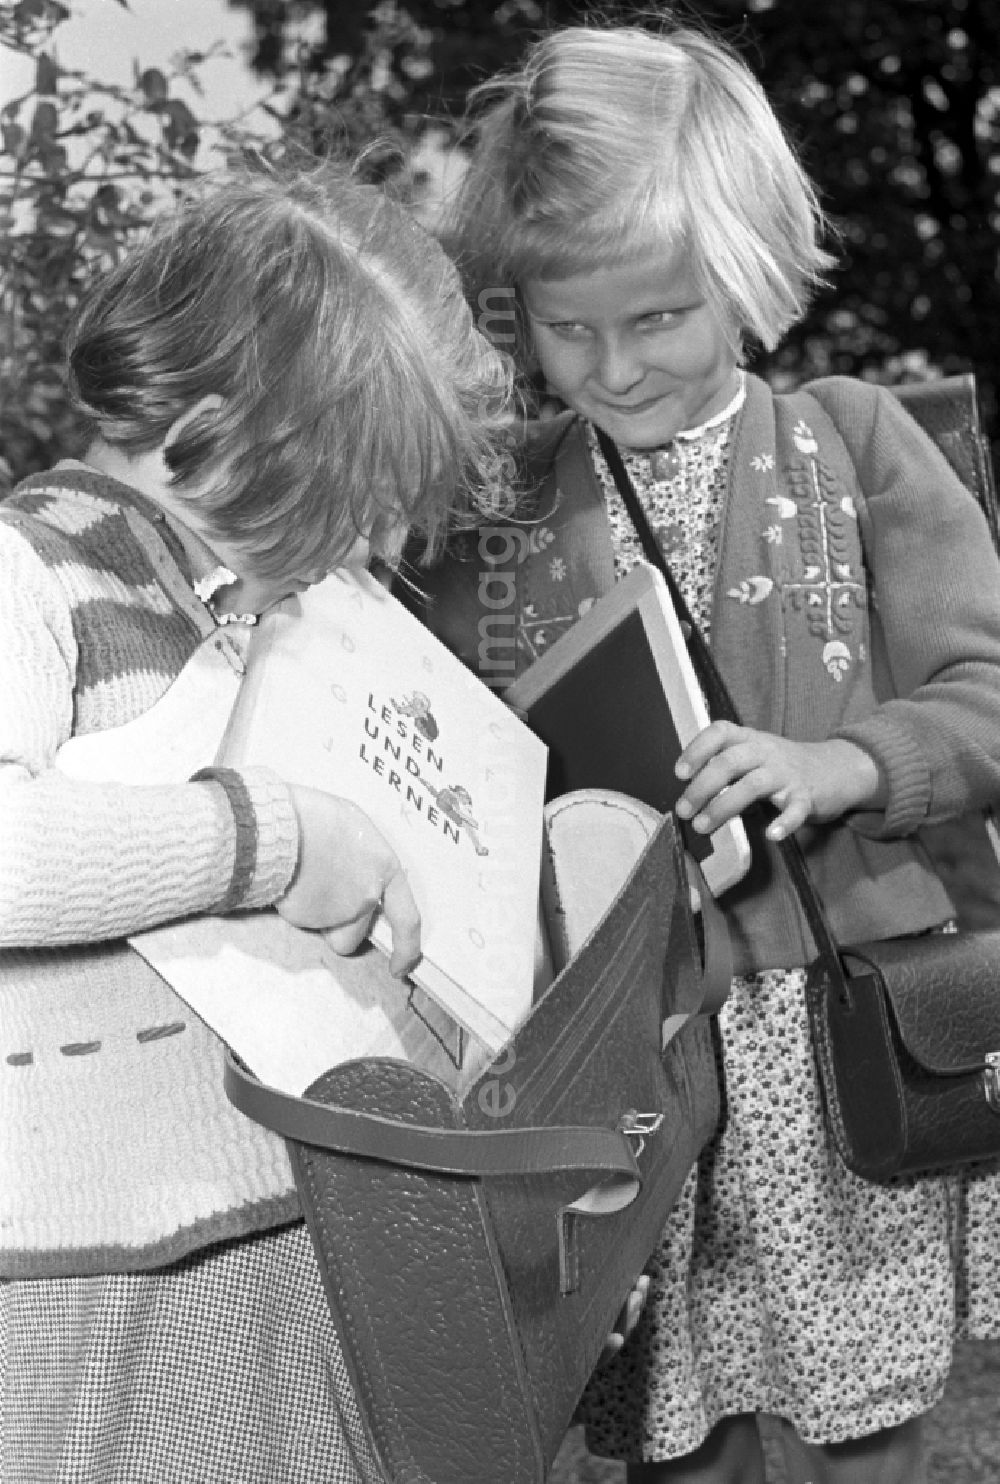 Dresden: Children on the occasion of the start of school for two young girls enthusiastically looking at a school book on the German language Unsere Fiebel in the district of Altstadt in Dresden in the state of Saxony on the territory of the former GDR, German Democratic Republic